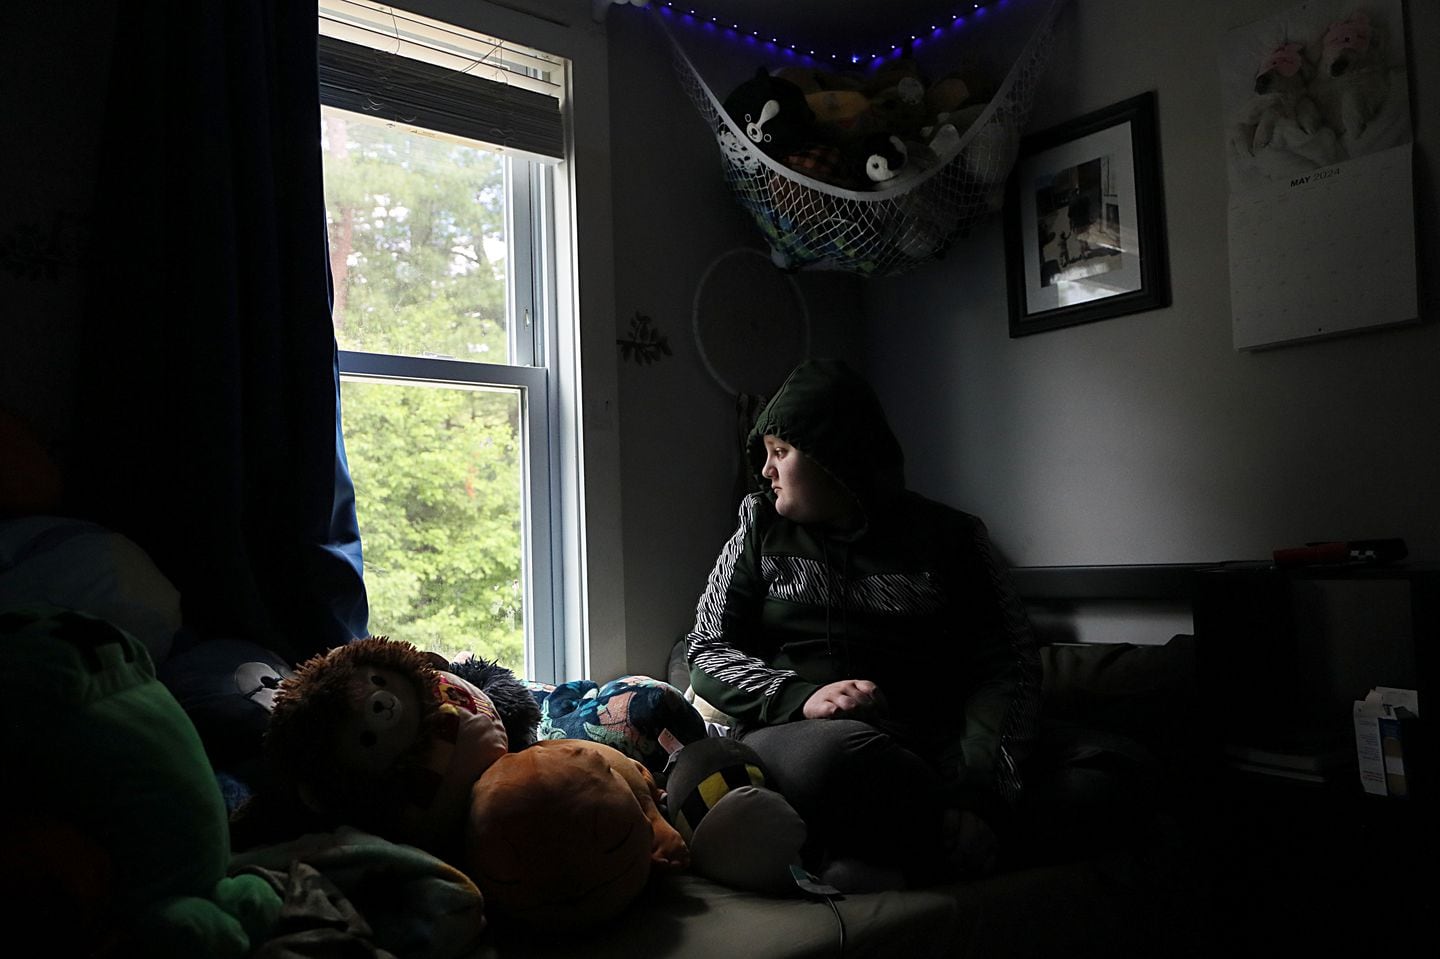 Eleven-year-old Hunter Scanlon has such severe anxiety, he hasn't been to school regularly since October.